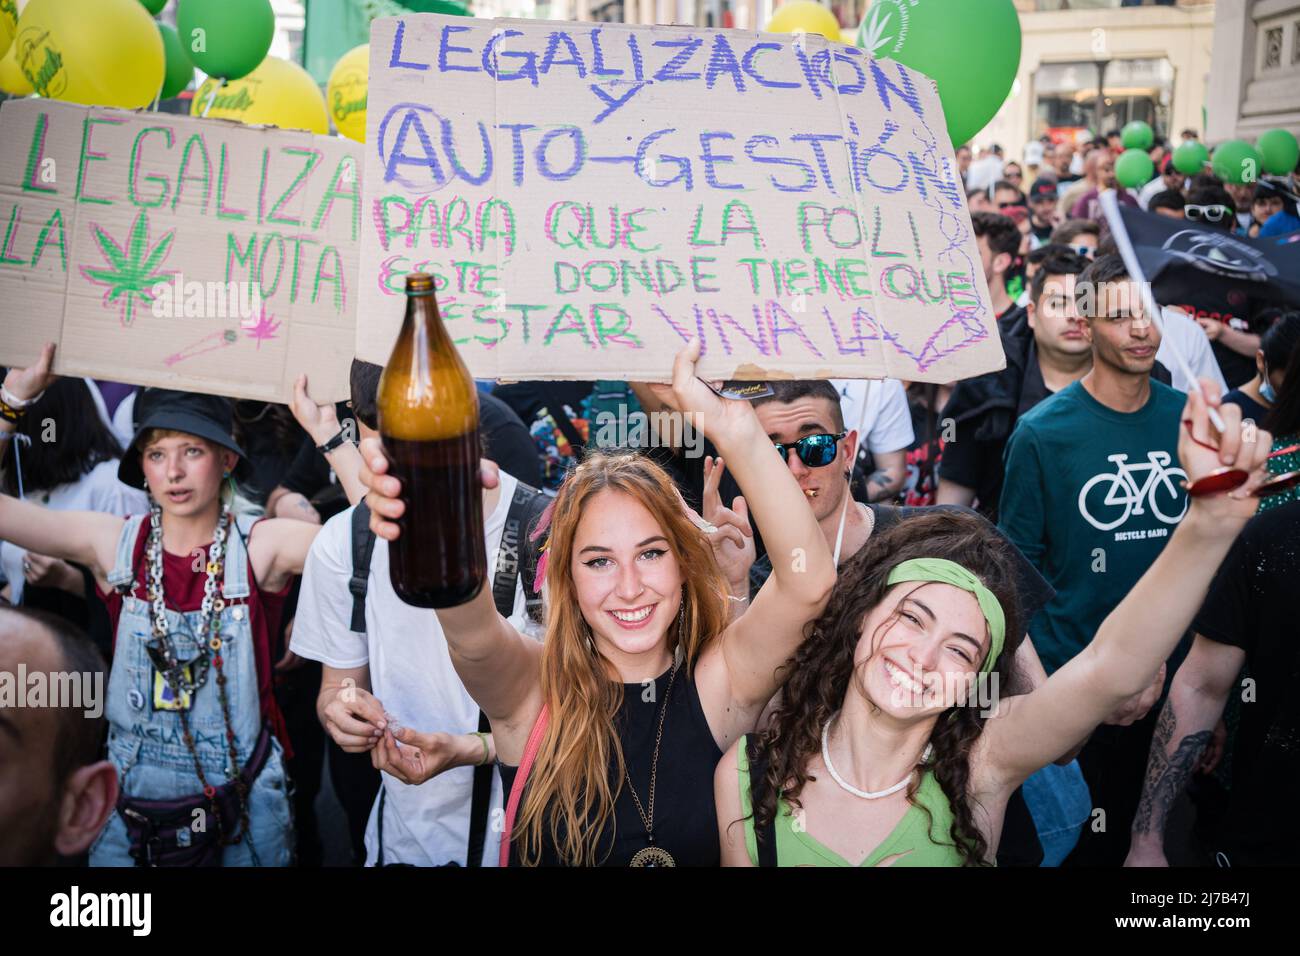 Two pro-cannabis demonstrators hold placards during a demonstration. Thousands of pro-cannabis activists took part in a demonstration in La Gran Via in Madrid, Spain, in favor of legalizing the medicinal and recreational use of marijuana. (Photo by Diego Radames / SOPA Images/Sipa USA) Stock Photo